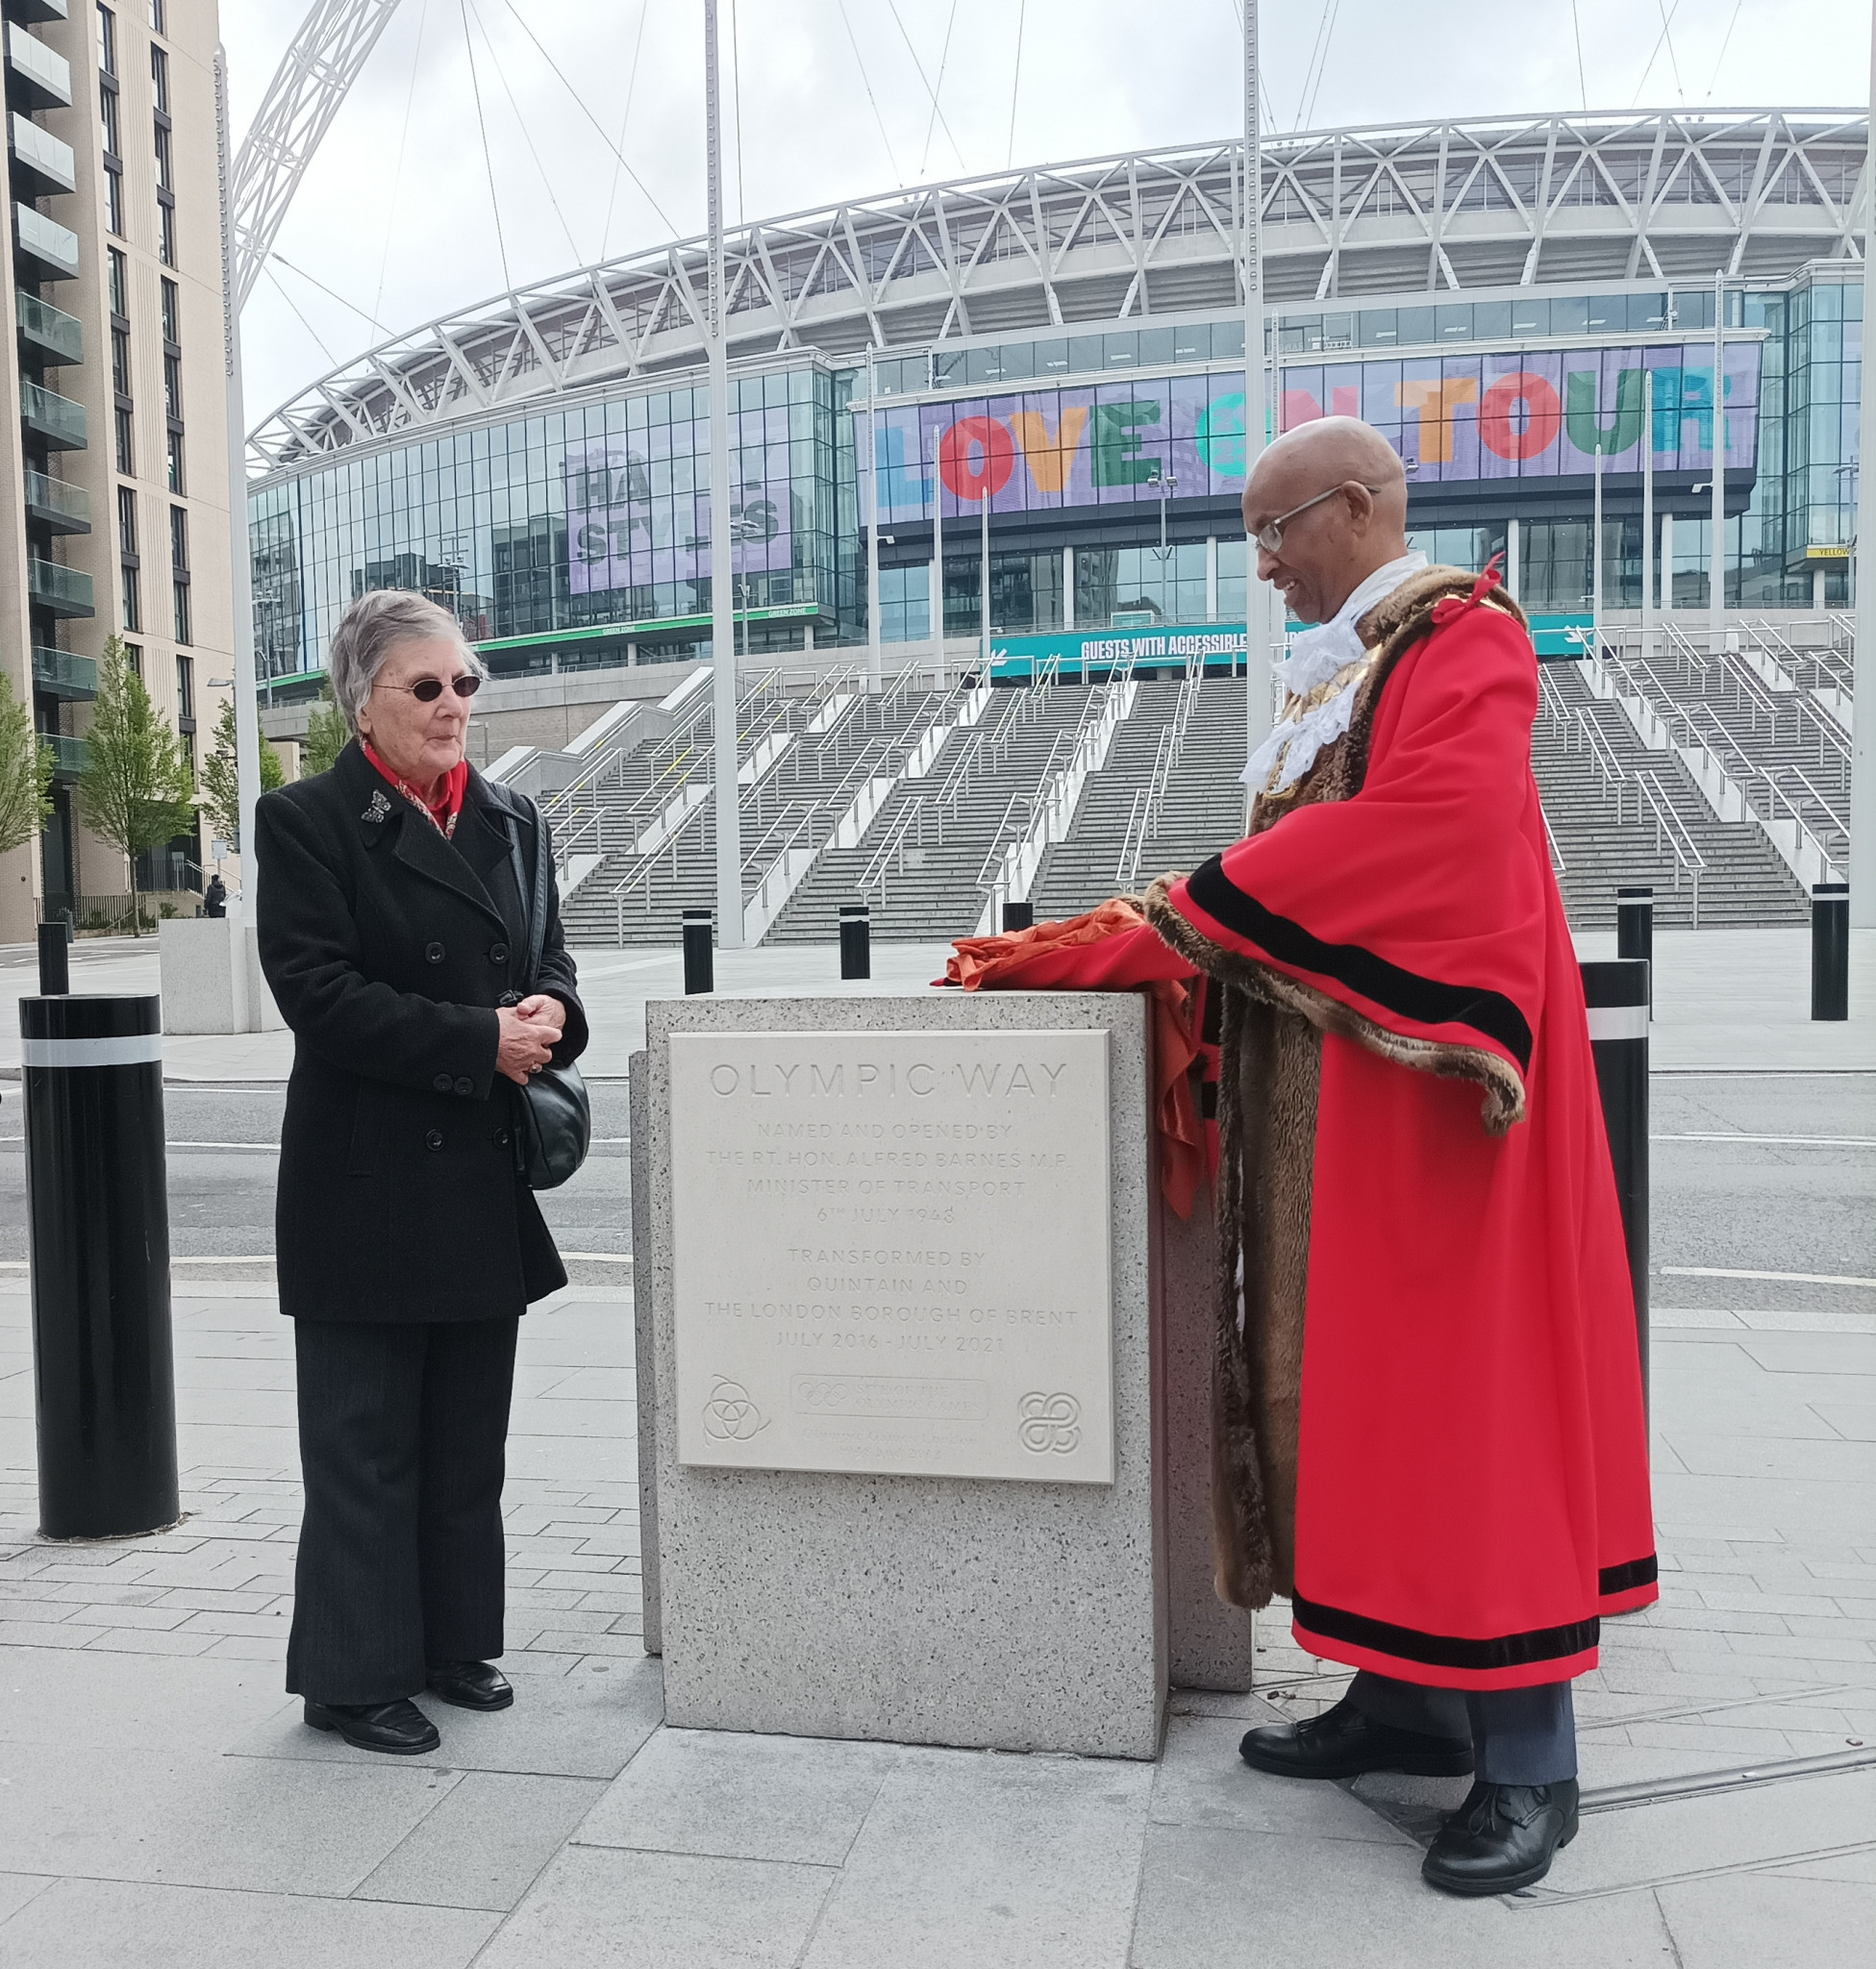 Wembley Mayor Abdi Aden unveils the new plaque accompanied by Margaret Winter, daughter of Walter Steedman, the engineer who designed Olympic Way ©ITG